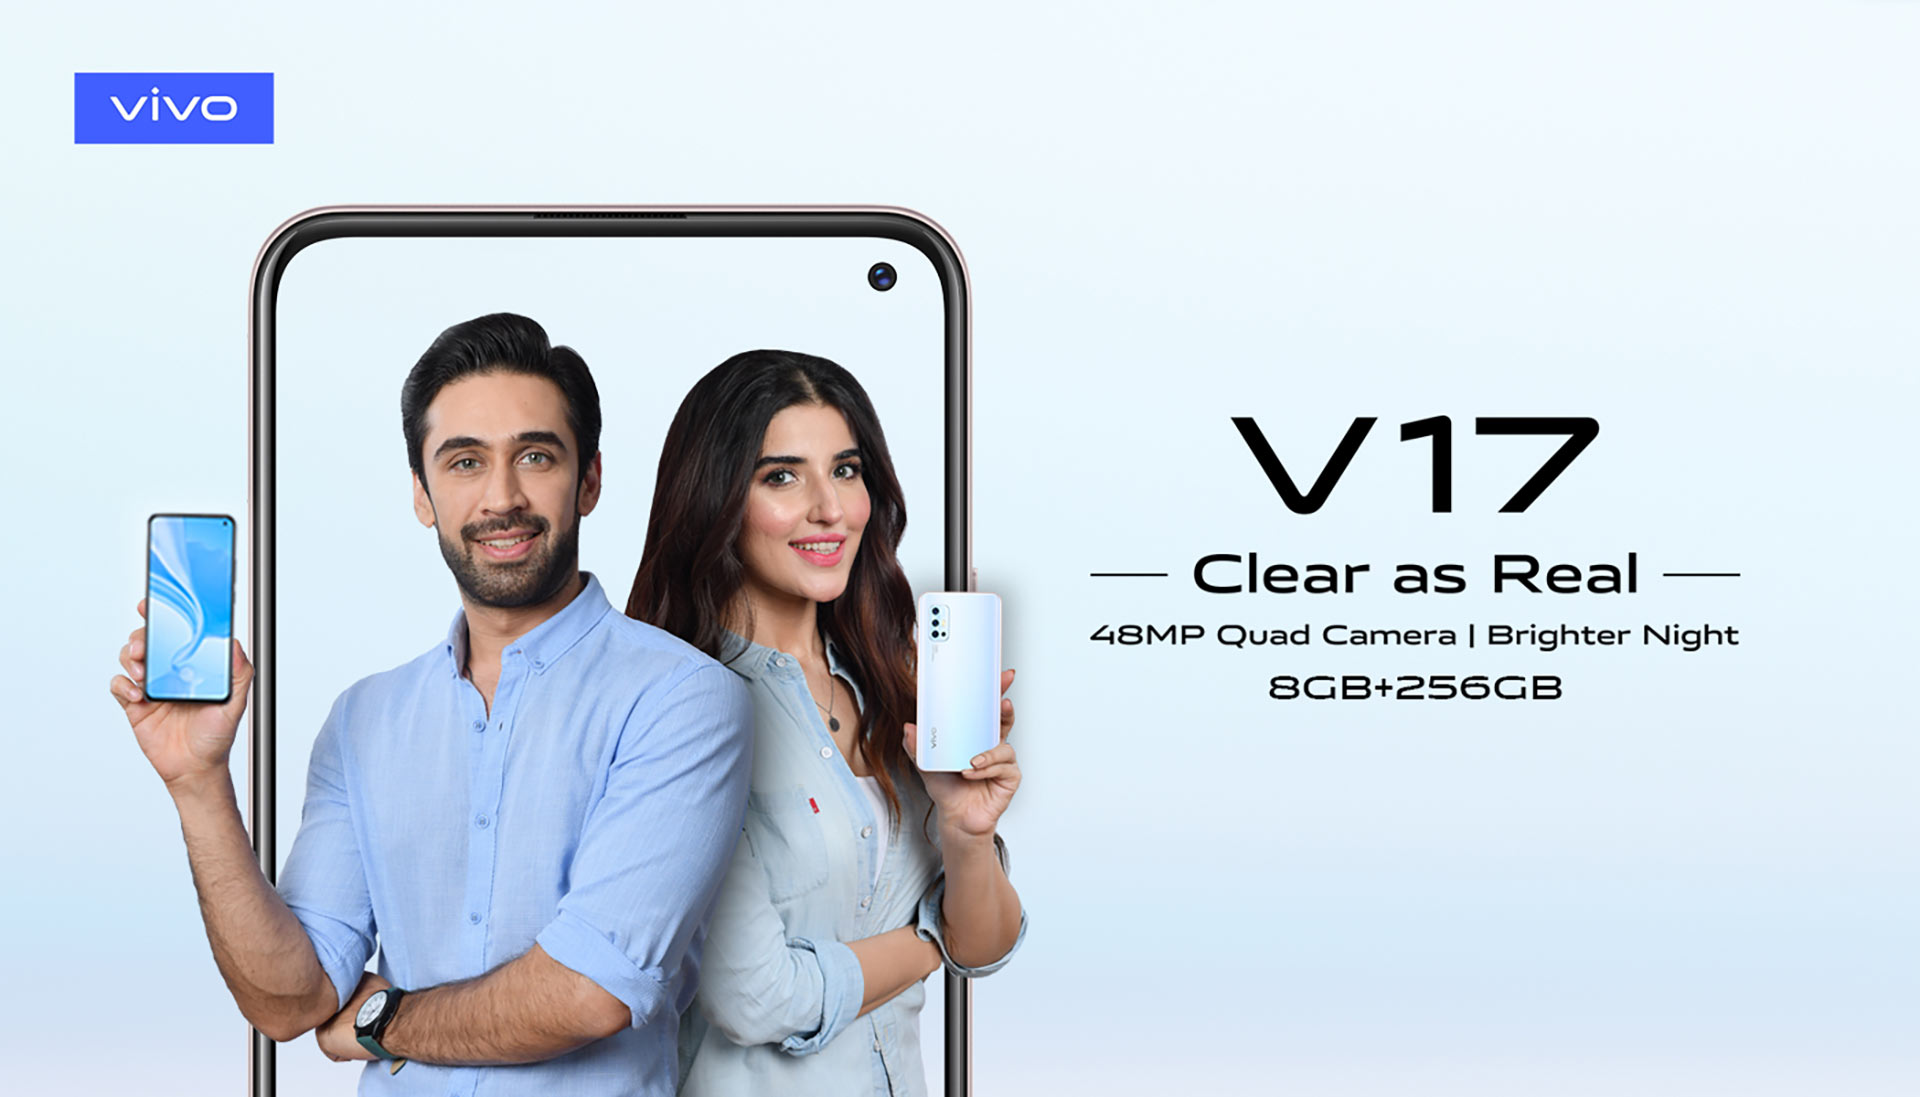 vivo V17 Launched in Pakistan, Users will Now See the Brighter Nights